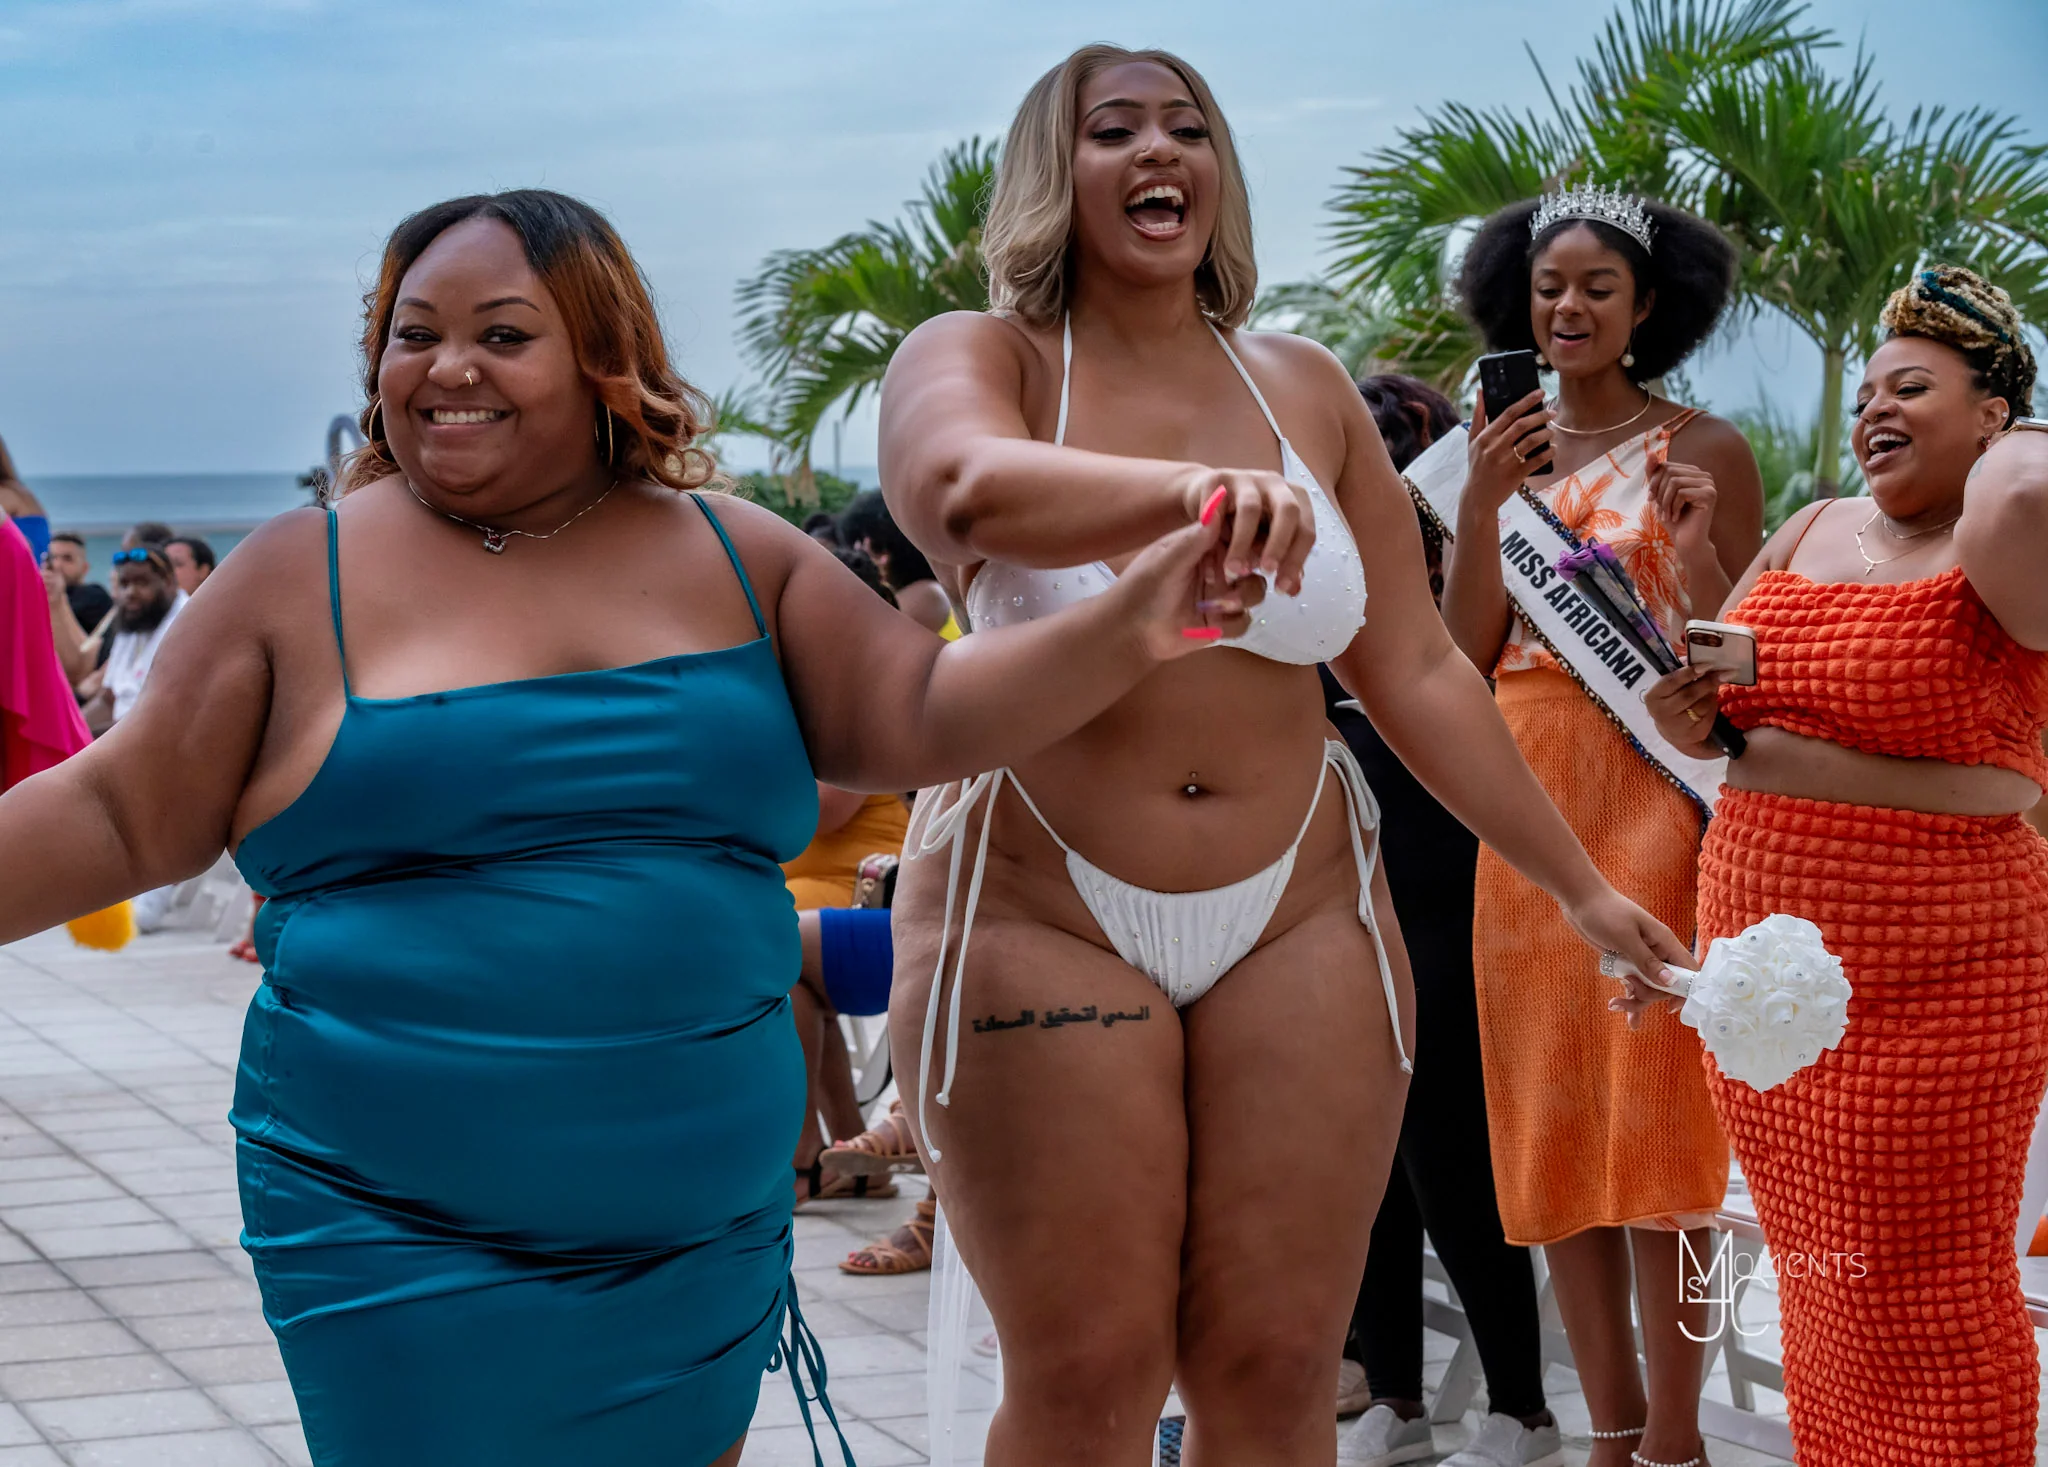 Plus Size Swimwear For Spring 2023 - The Fat Girls Guide